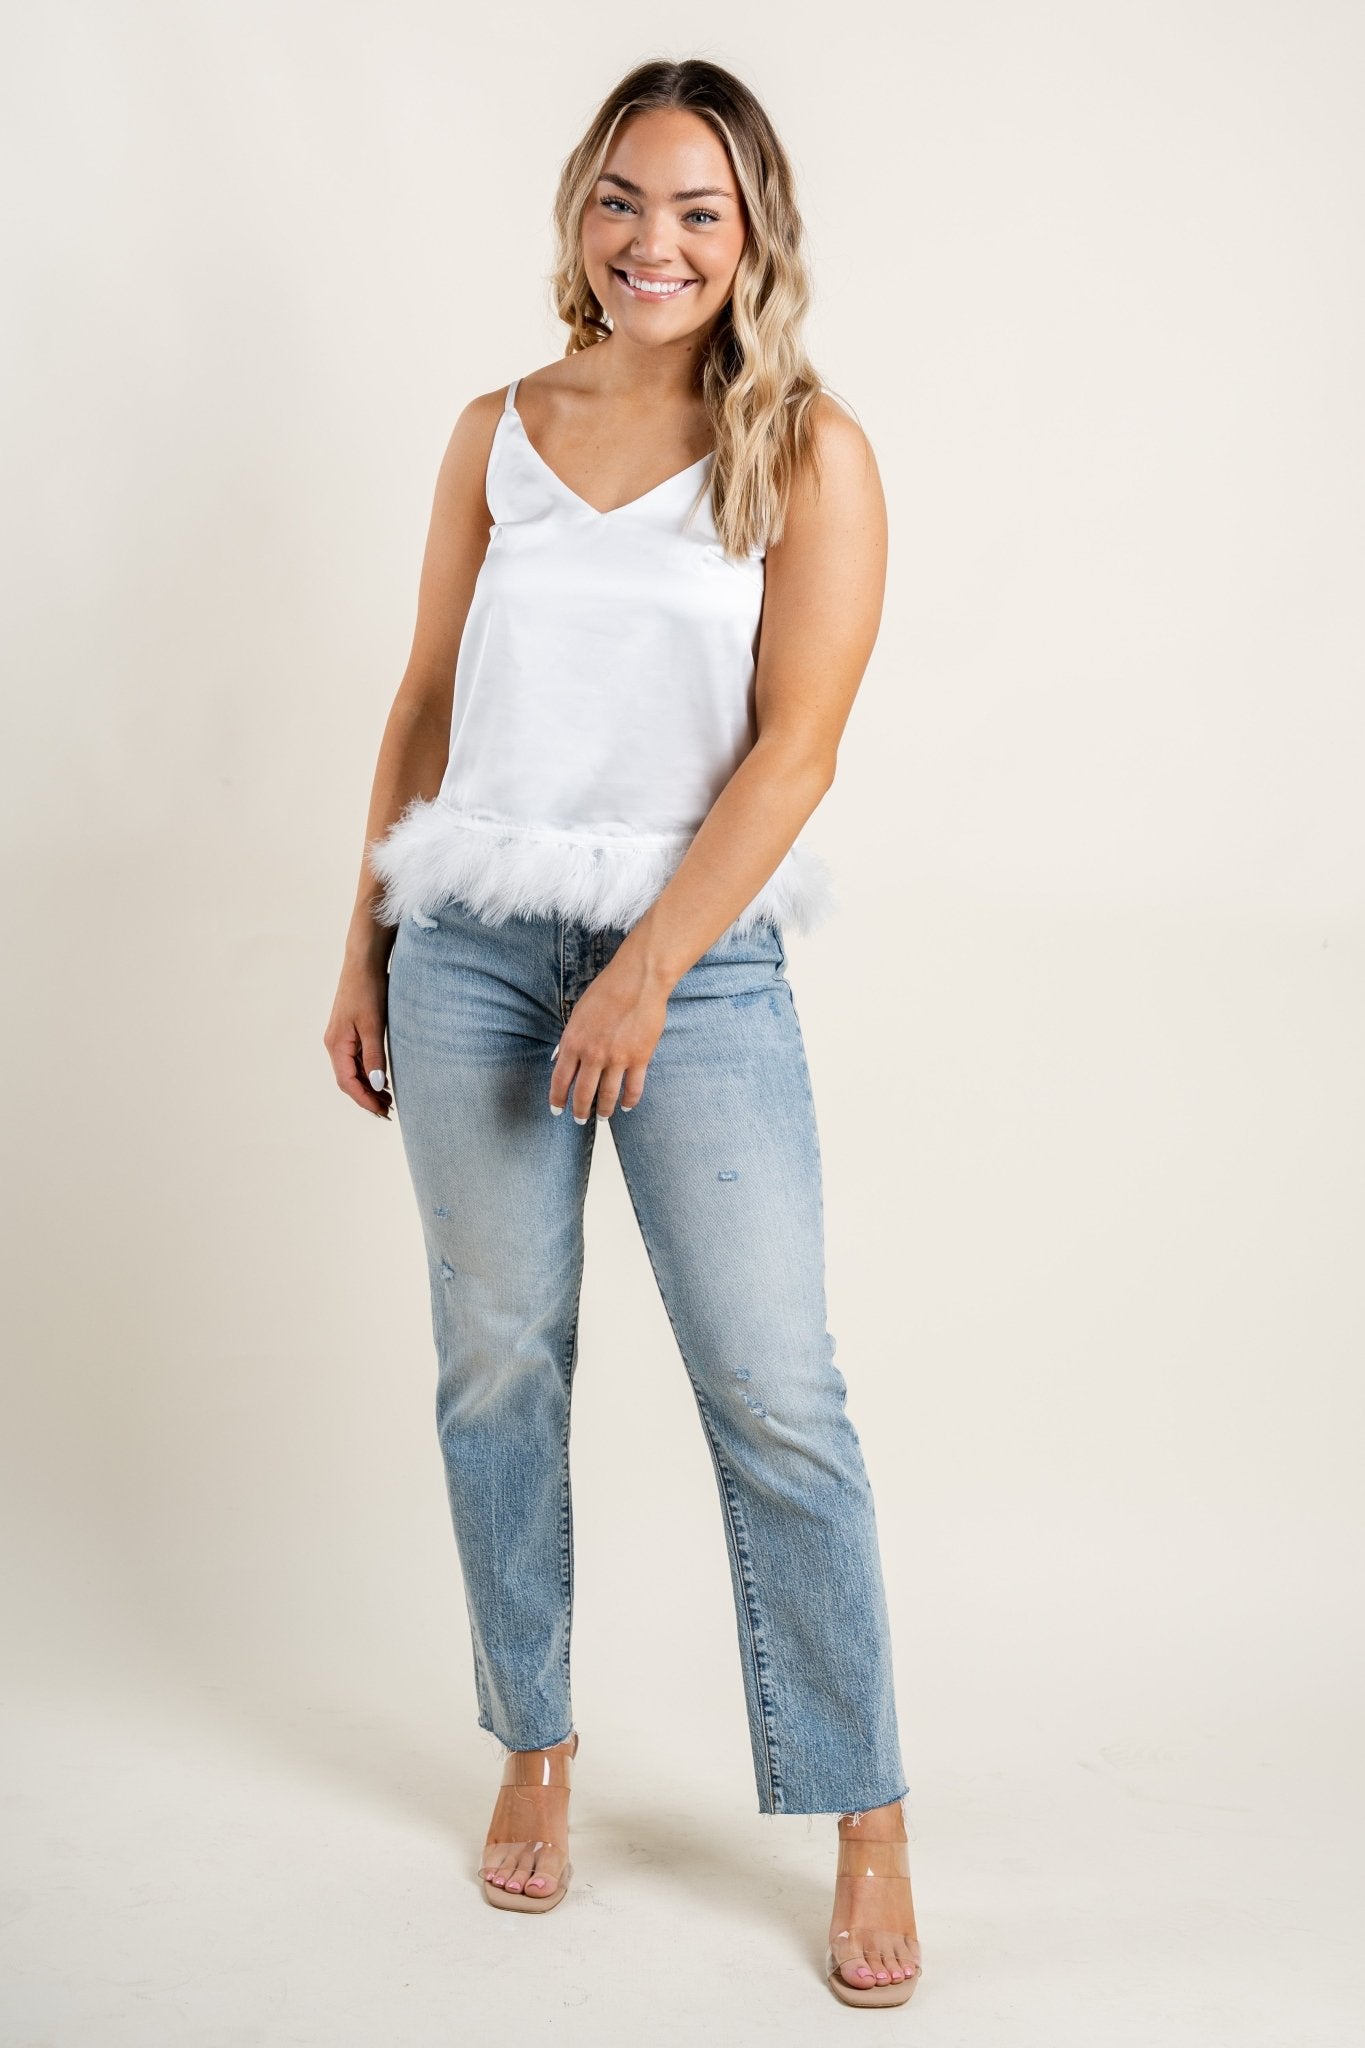 Feather trim cami tank top ivory - Adorable Tank Top - Unique Bridesmaid Ideas at Lush Fashion Lounge Boutique in Oklahoma